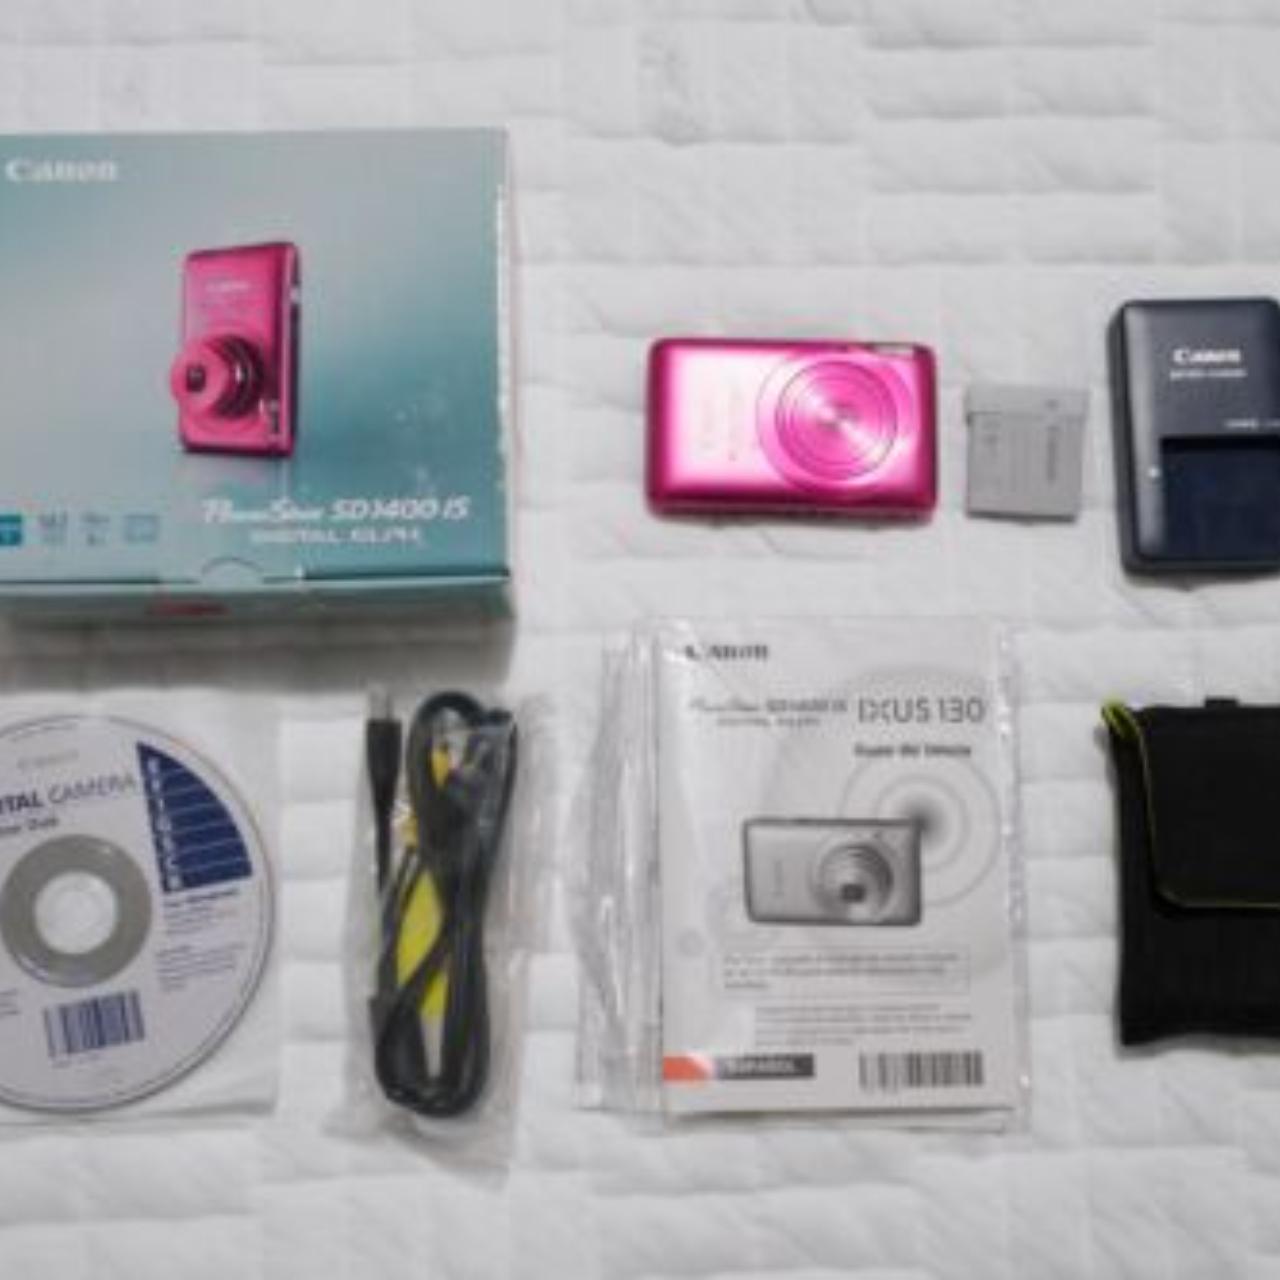 Canon PowerShot SD1400 IS 14.1 MP Camera Pink +... - Depop